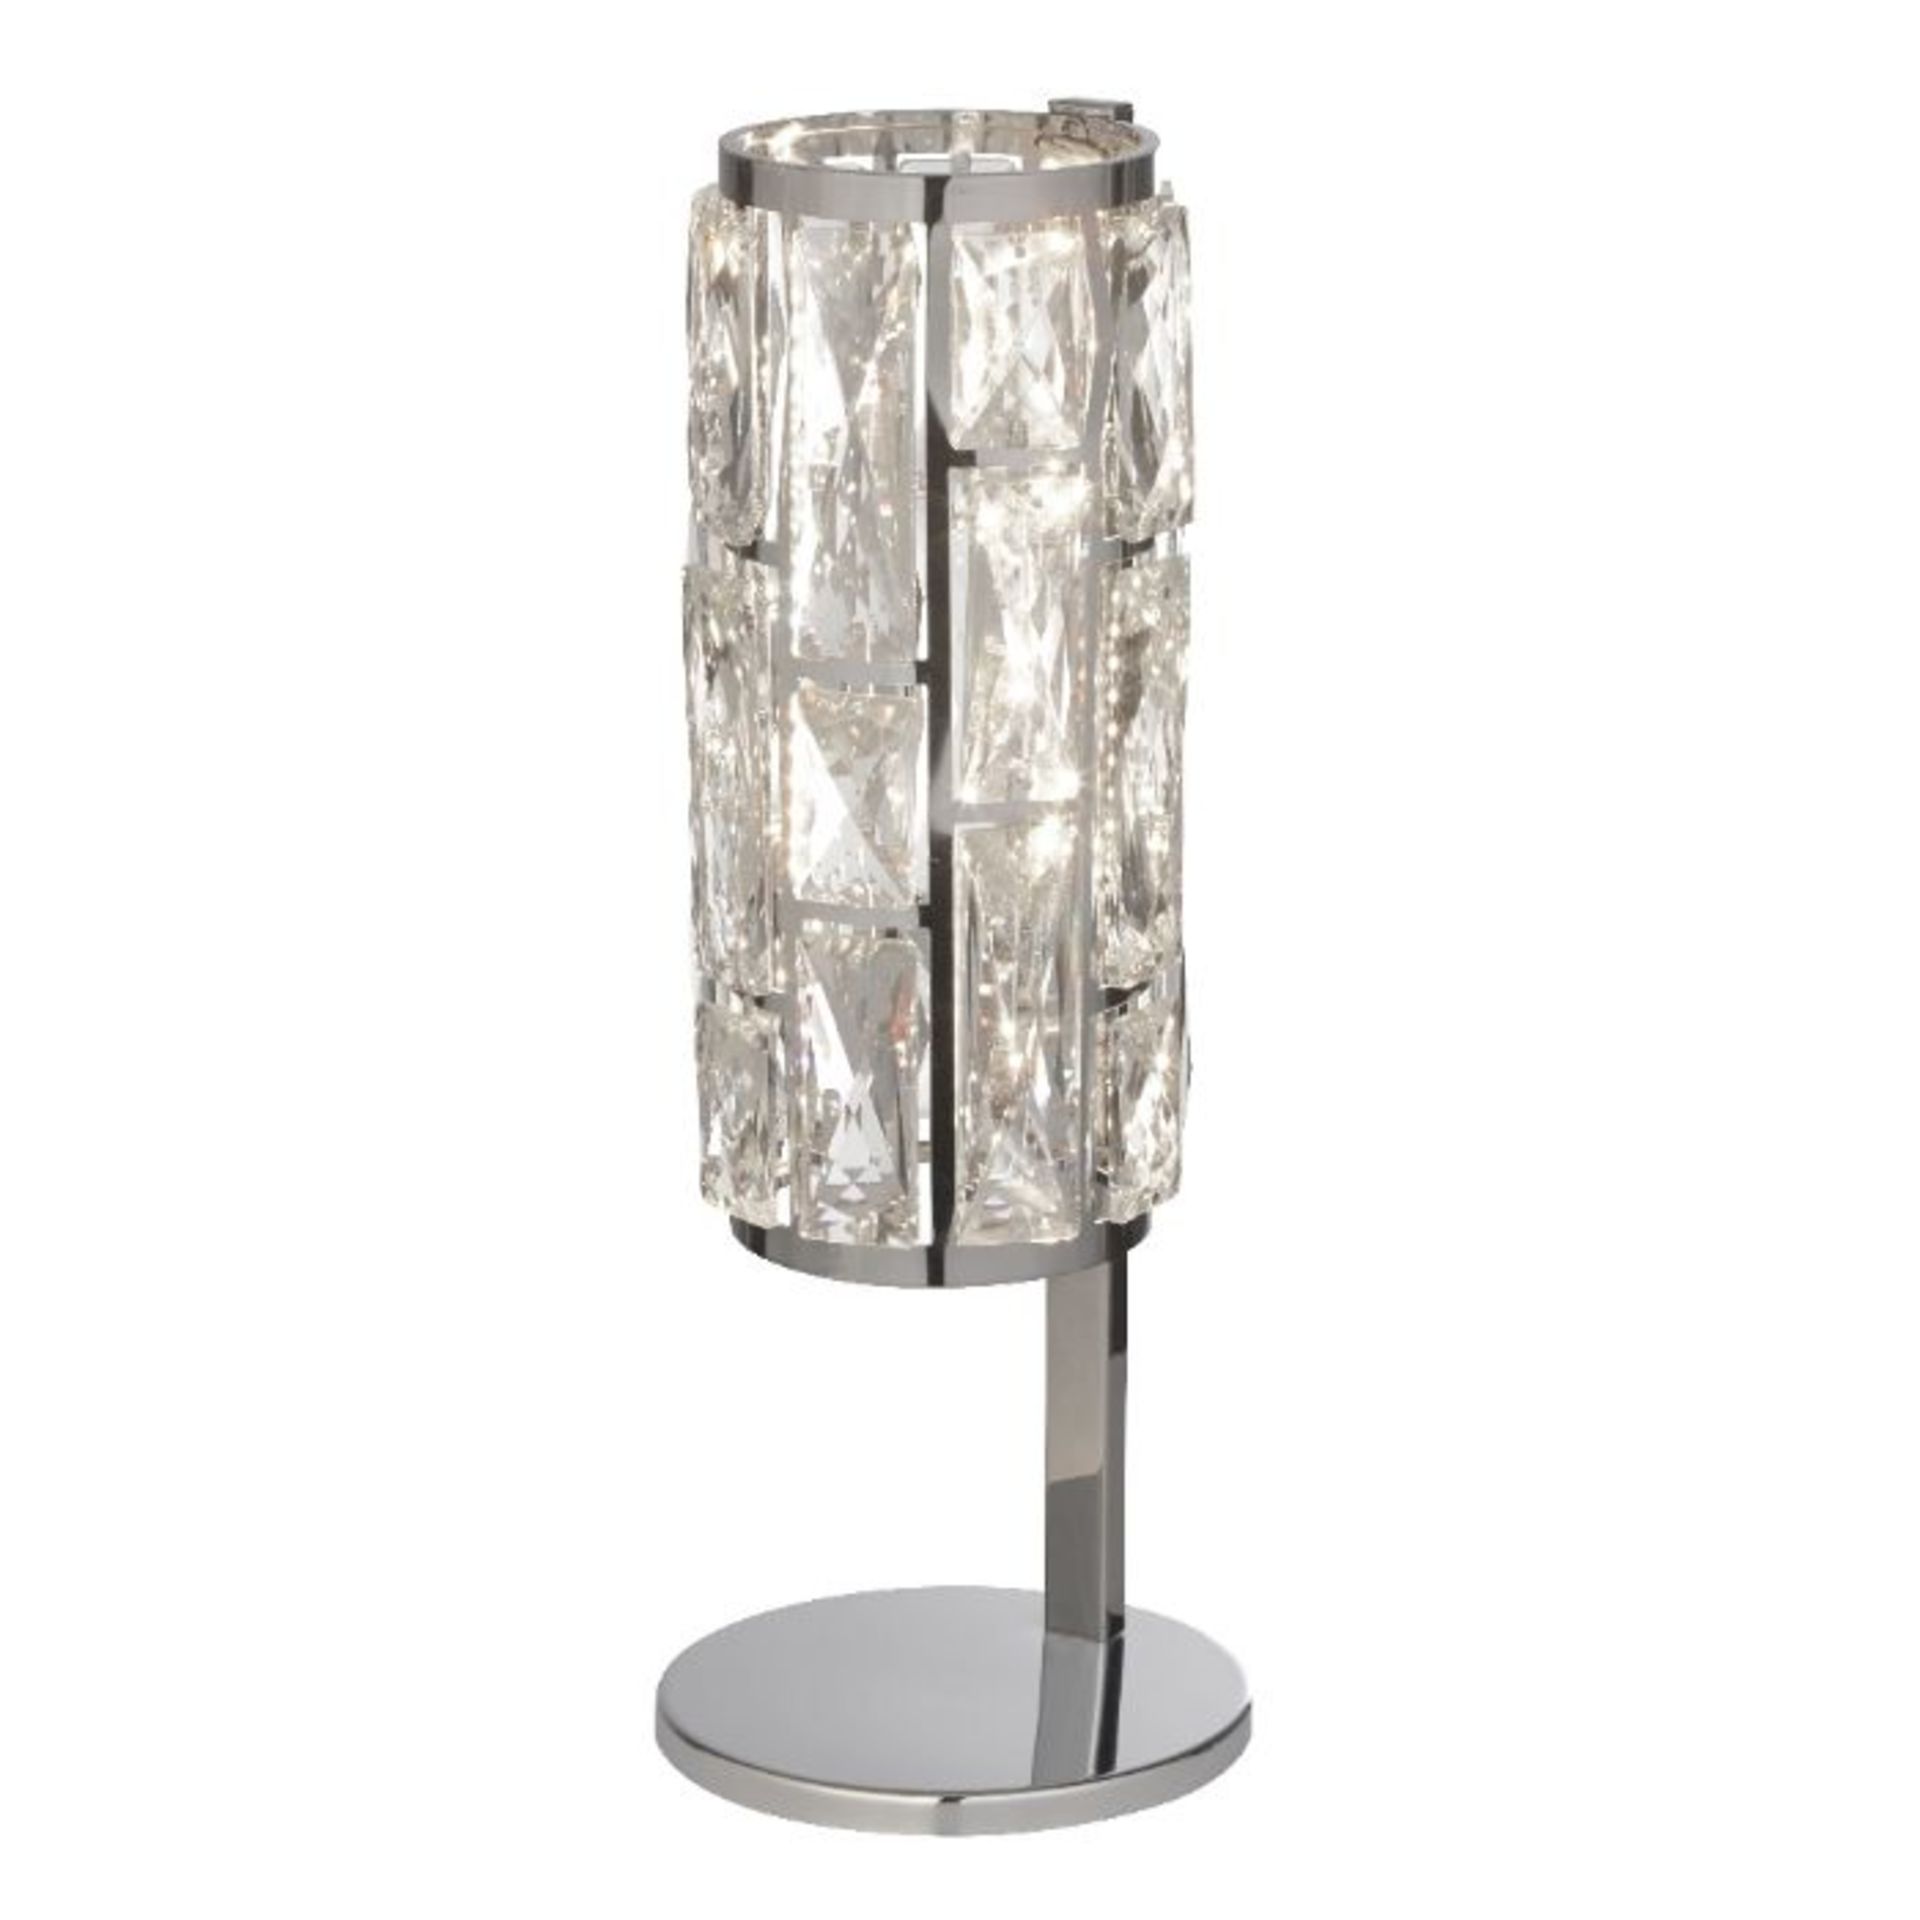 BRAND NEW FACETTED GLASS AND CHROME LED TABLE LAMP 40.5CM HIGH, 10W, 650 Lumens - Eye-catching table